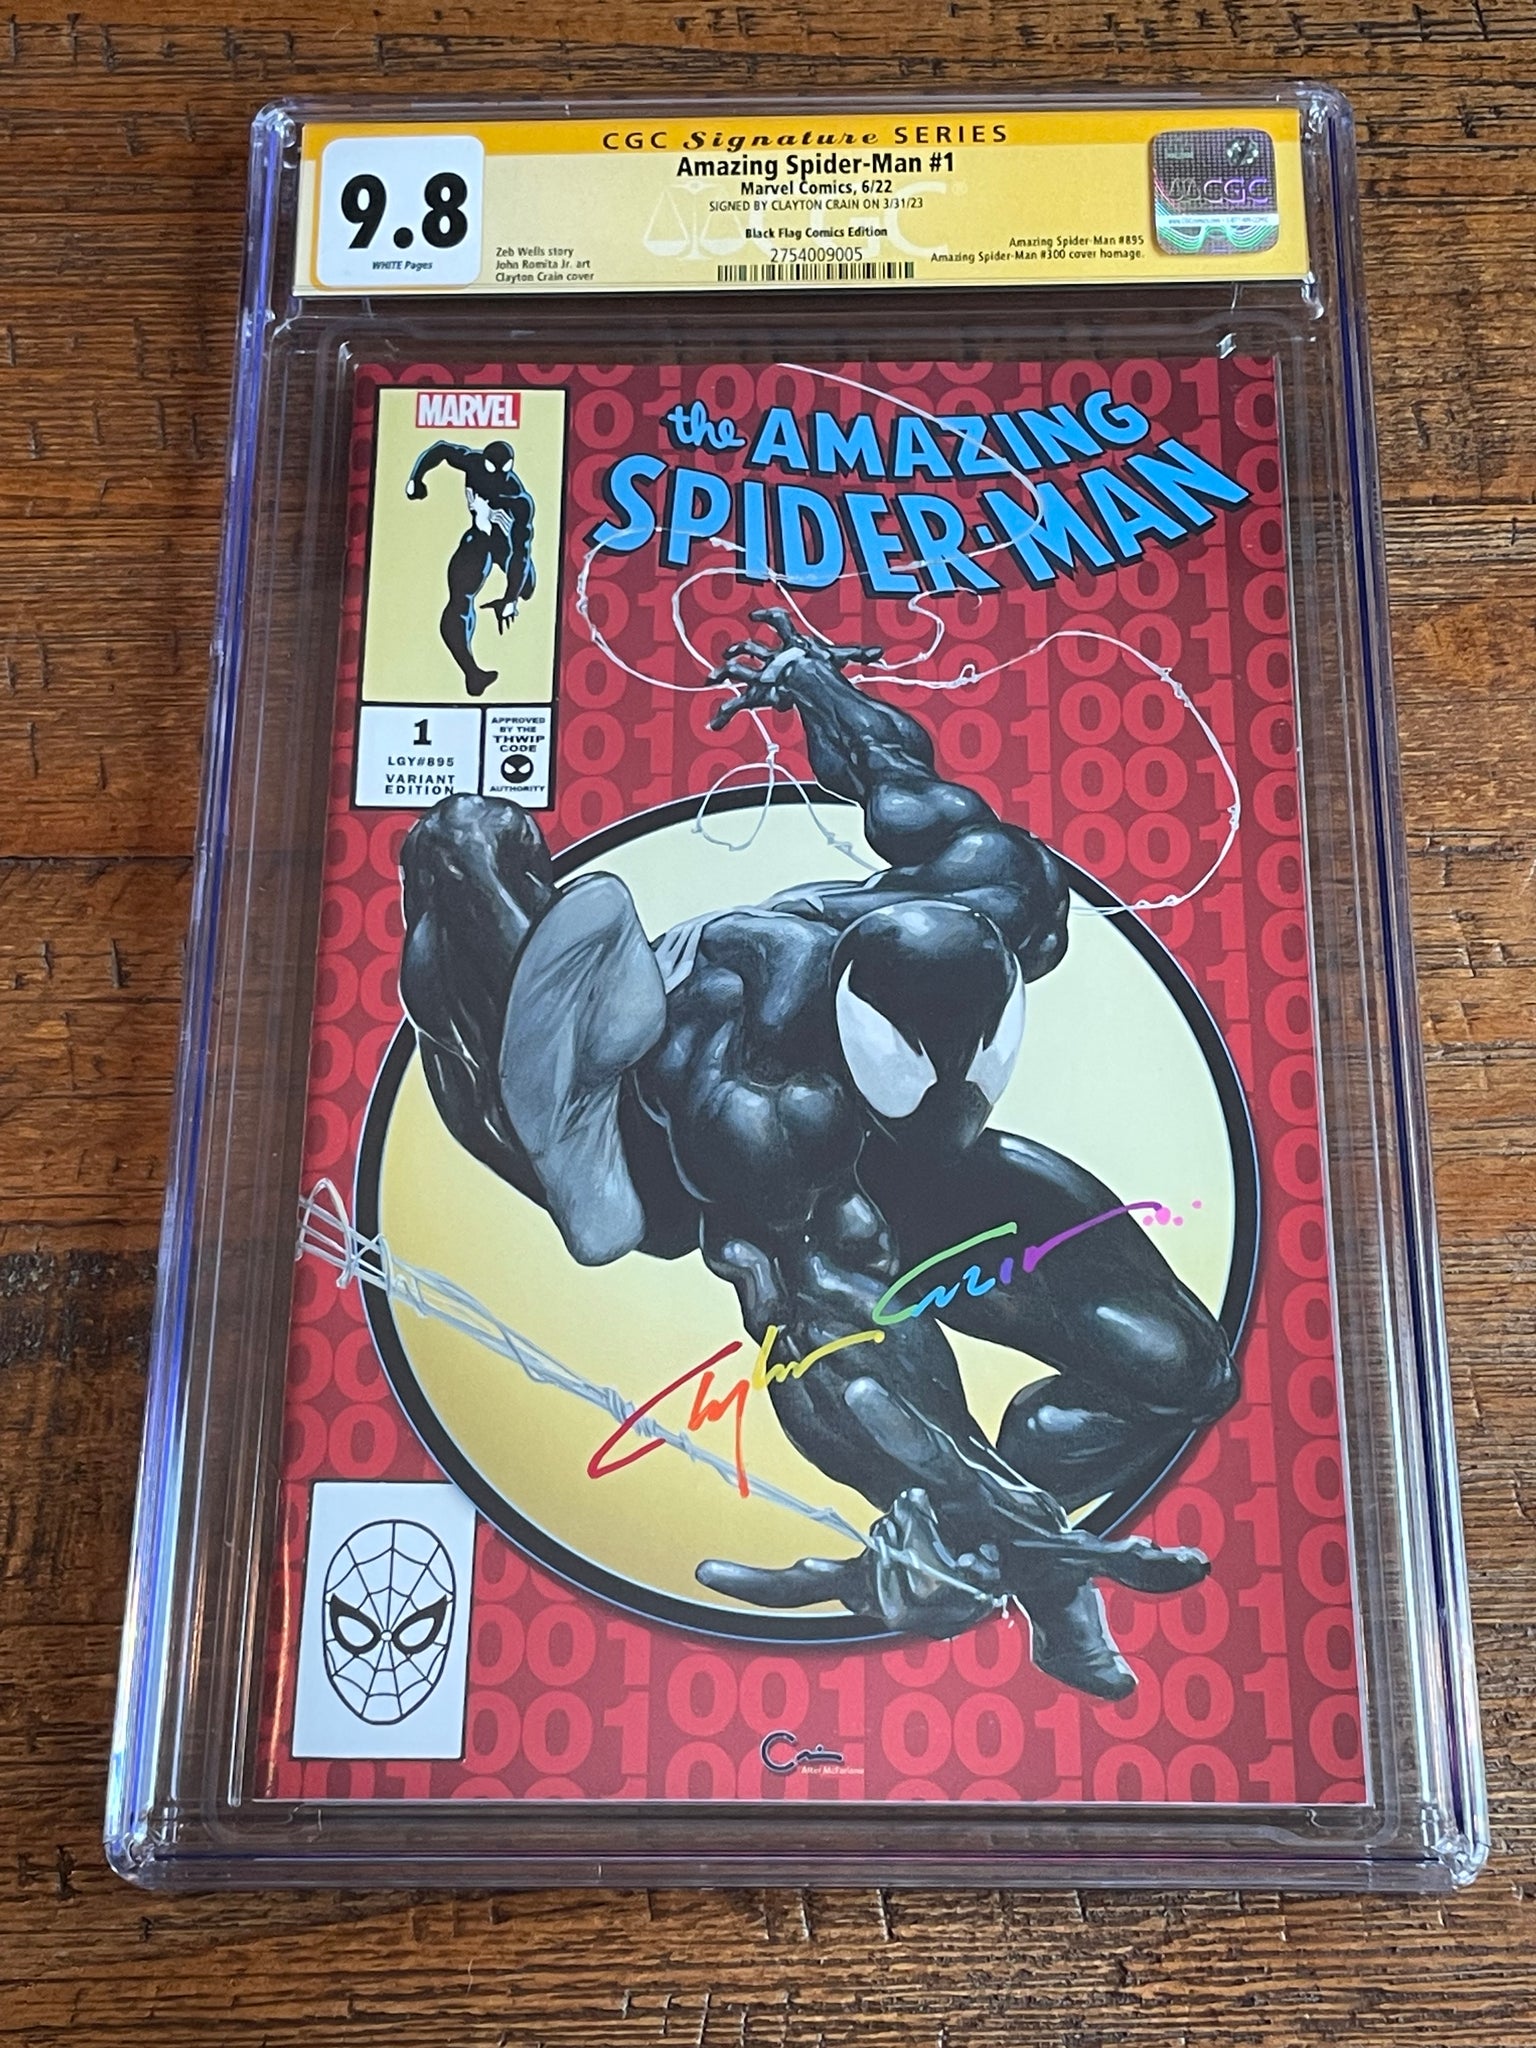 AMAZING SPIDER-MAN #1 CGC SS 9.8 CLAYTON CRAIN INFINITY SIGNED TRADE VARIANT-A 300